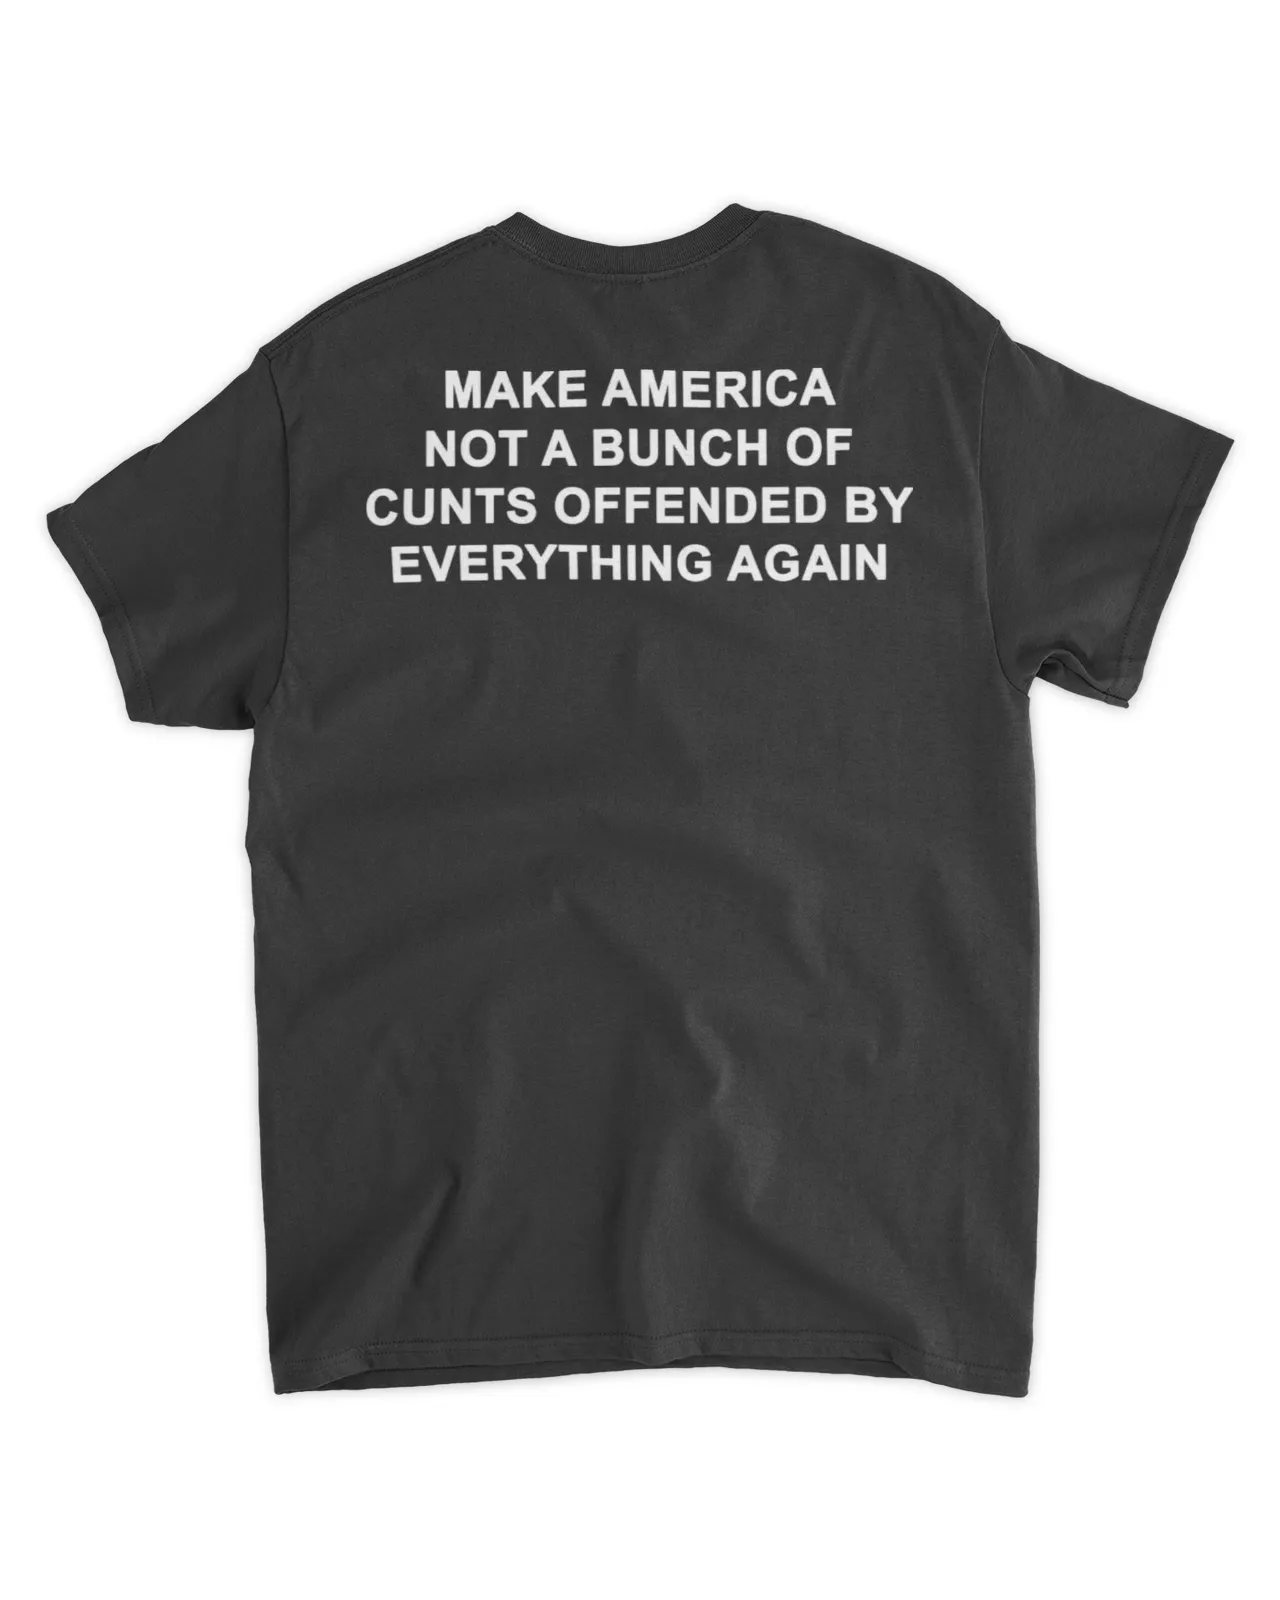  Make America not a bunch of cunts offended by everything again shirt